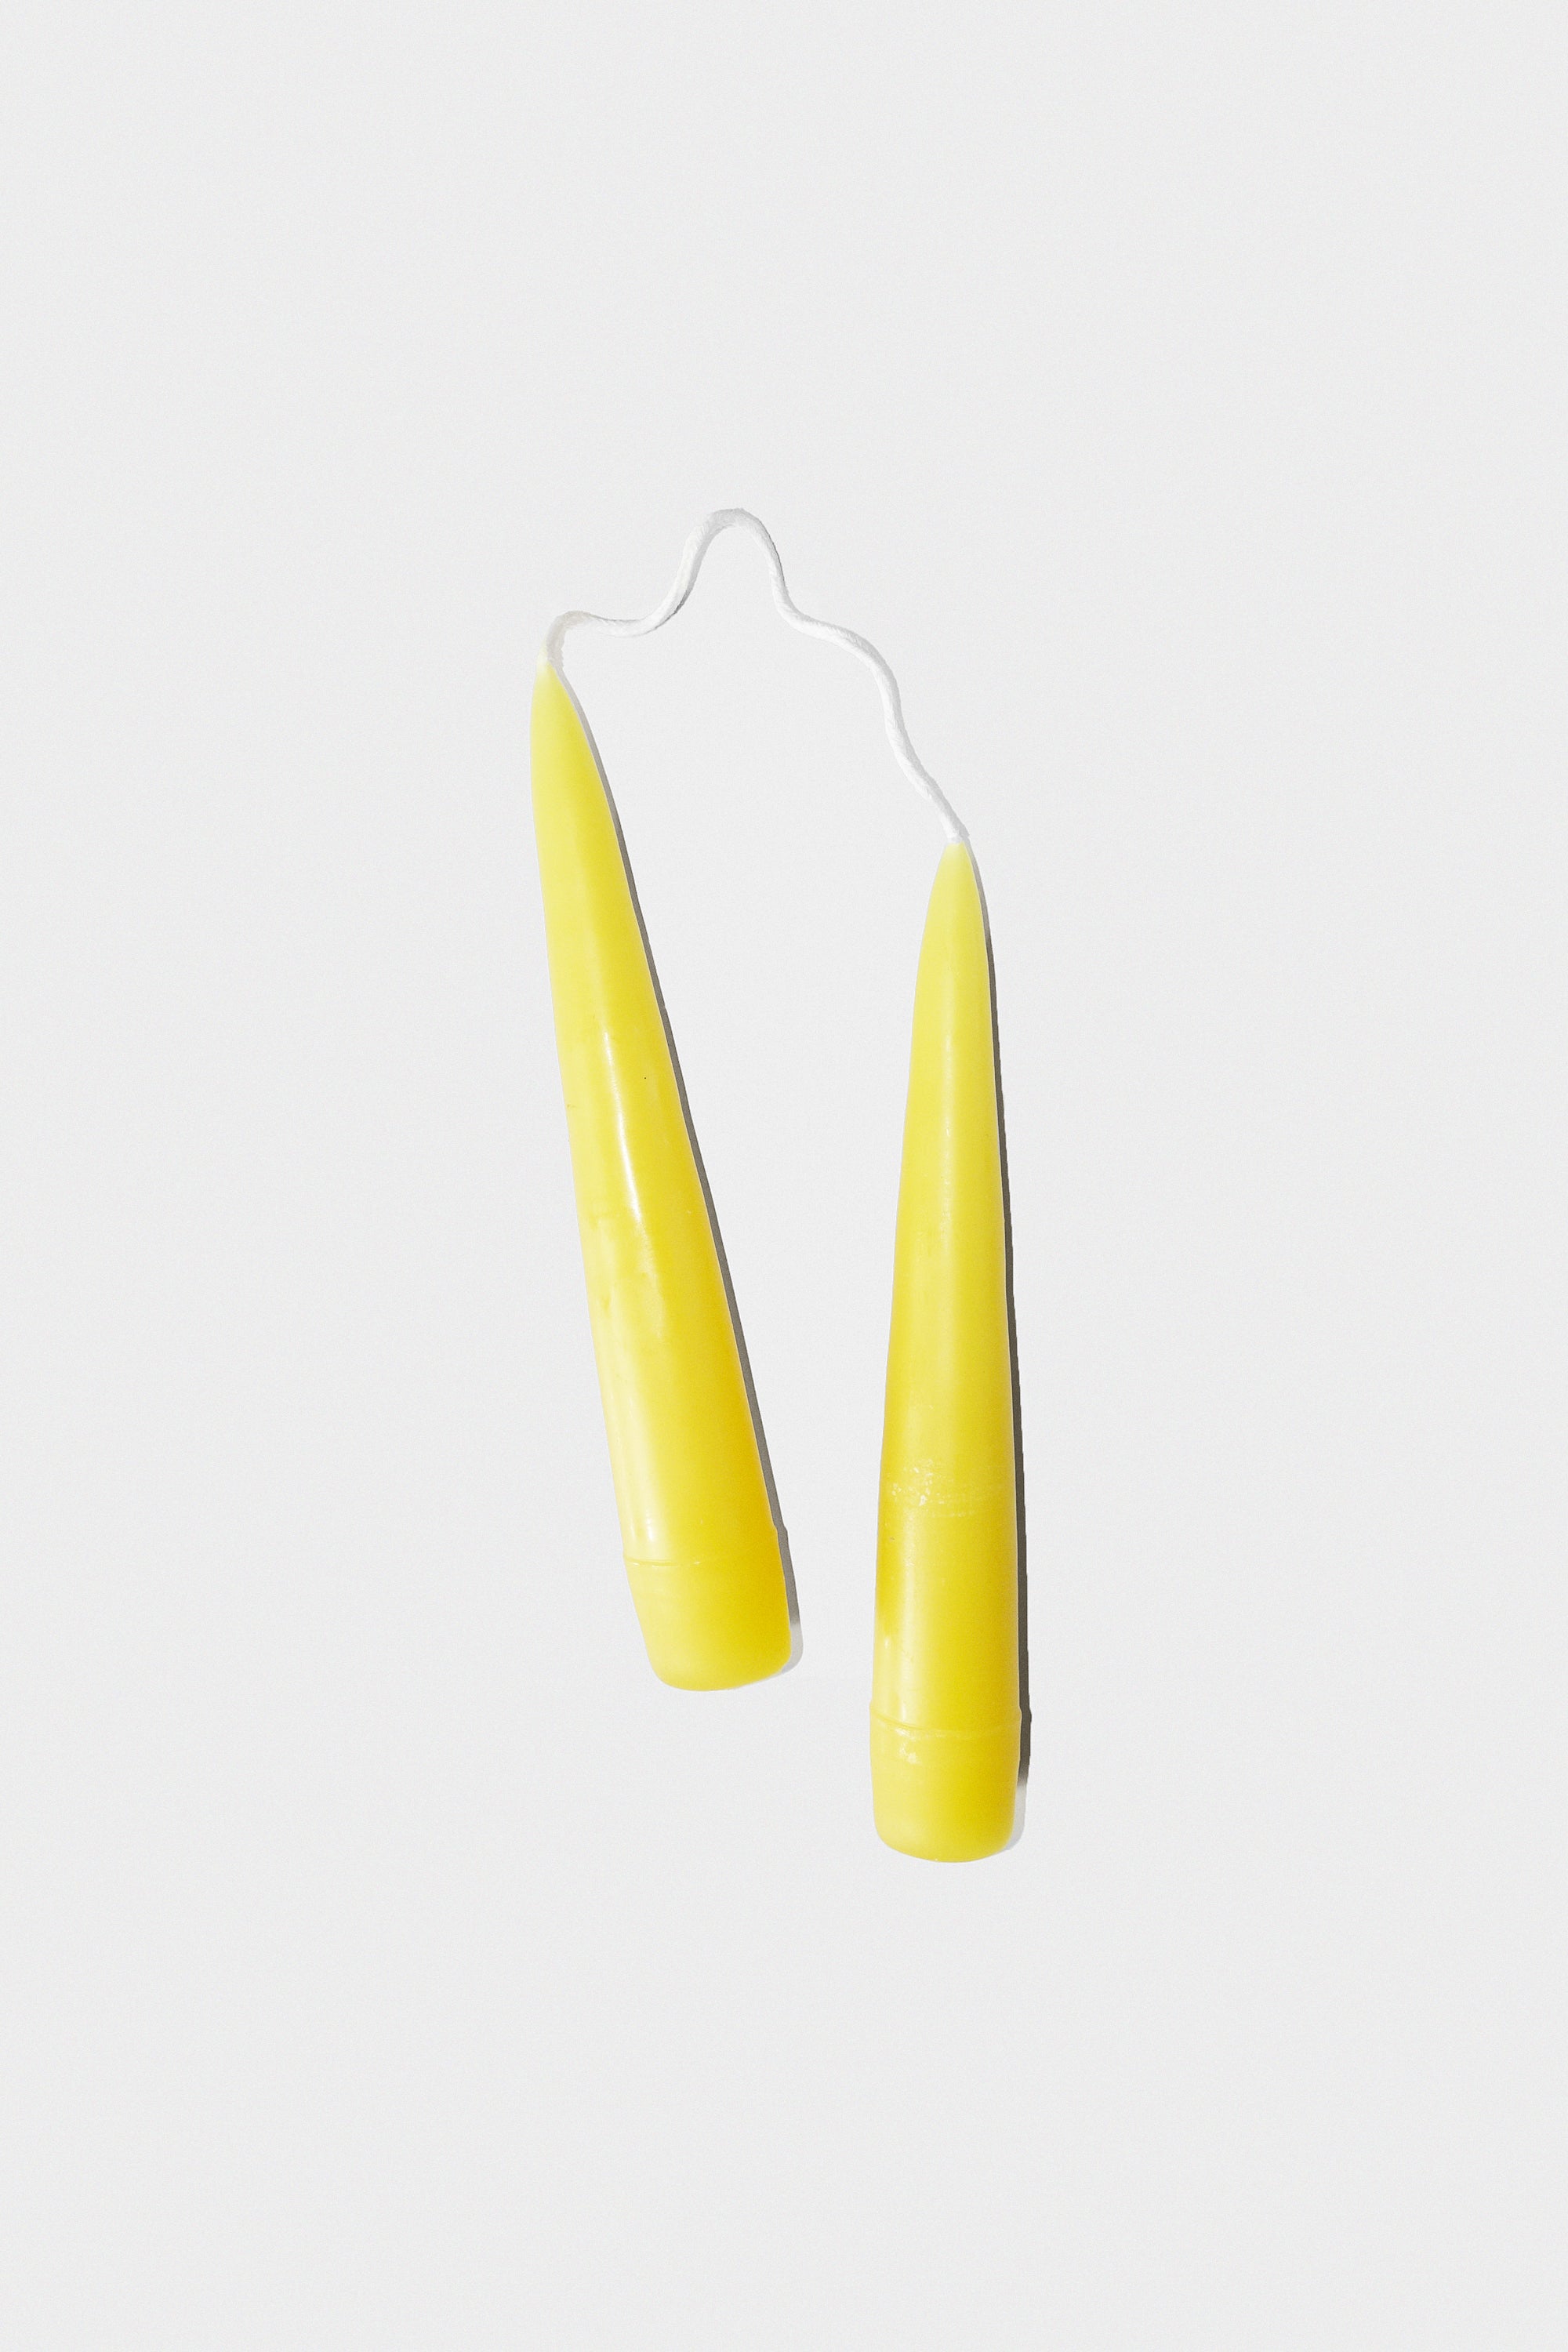 06" Taper Candles in Maize